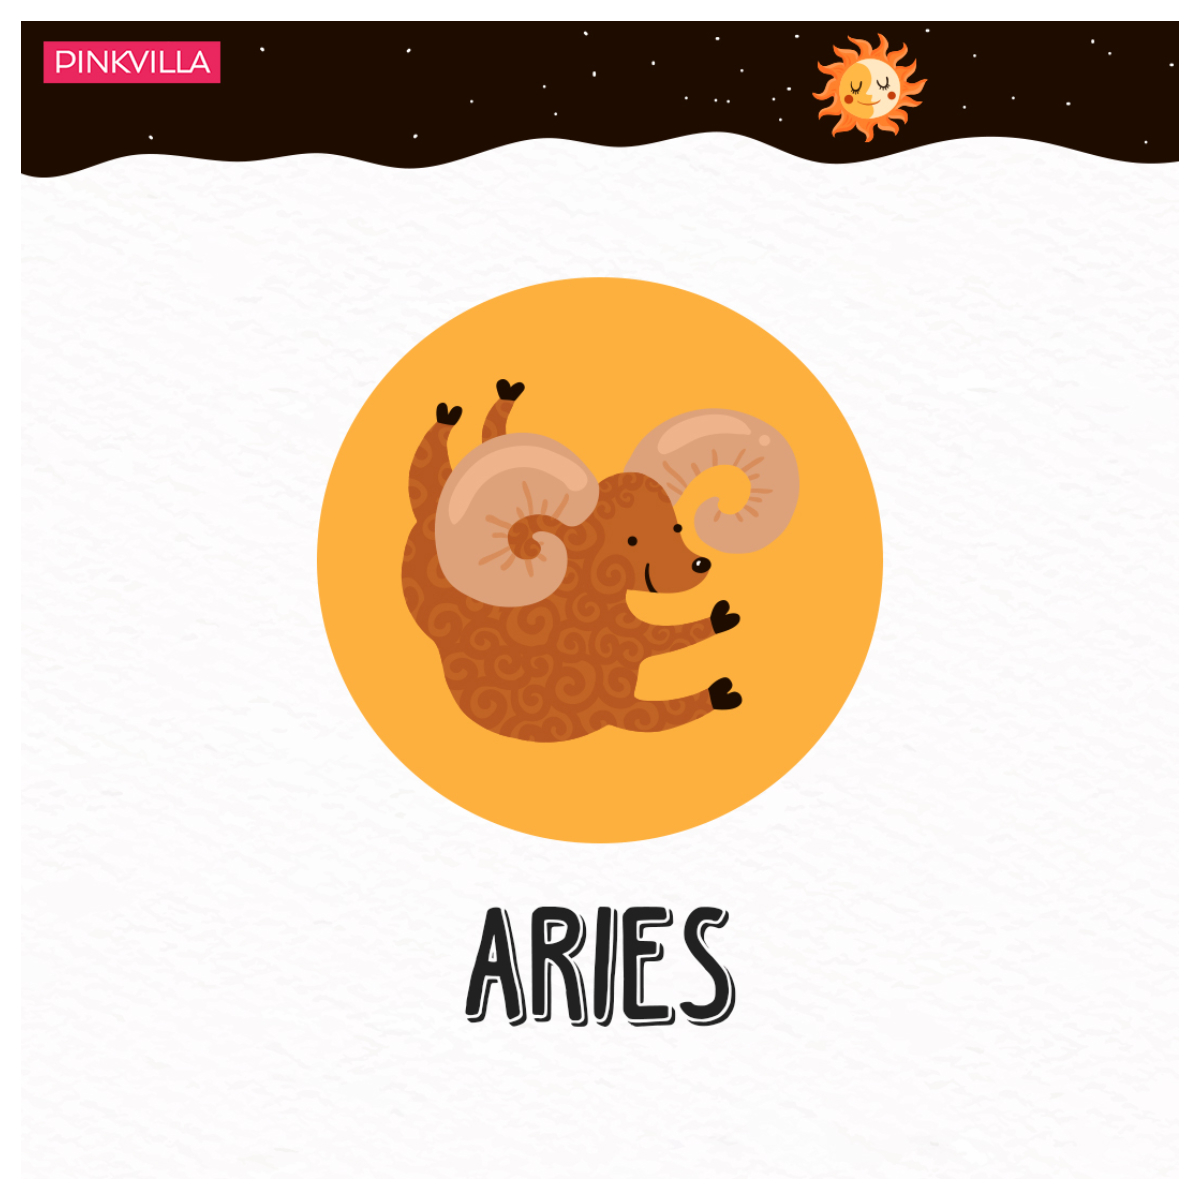 Leo to Aries: 4 Zodiac signs who like to play by the rules